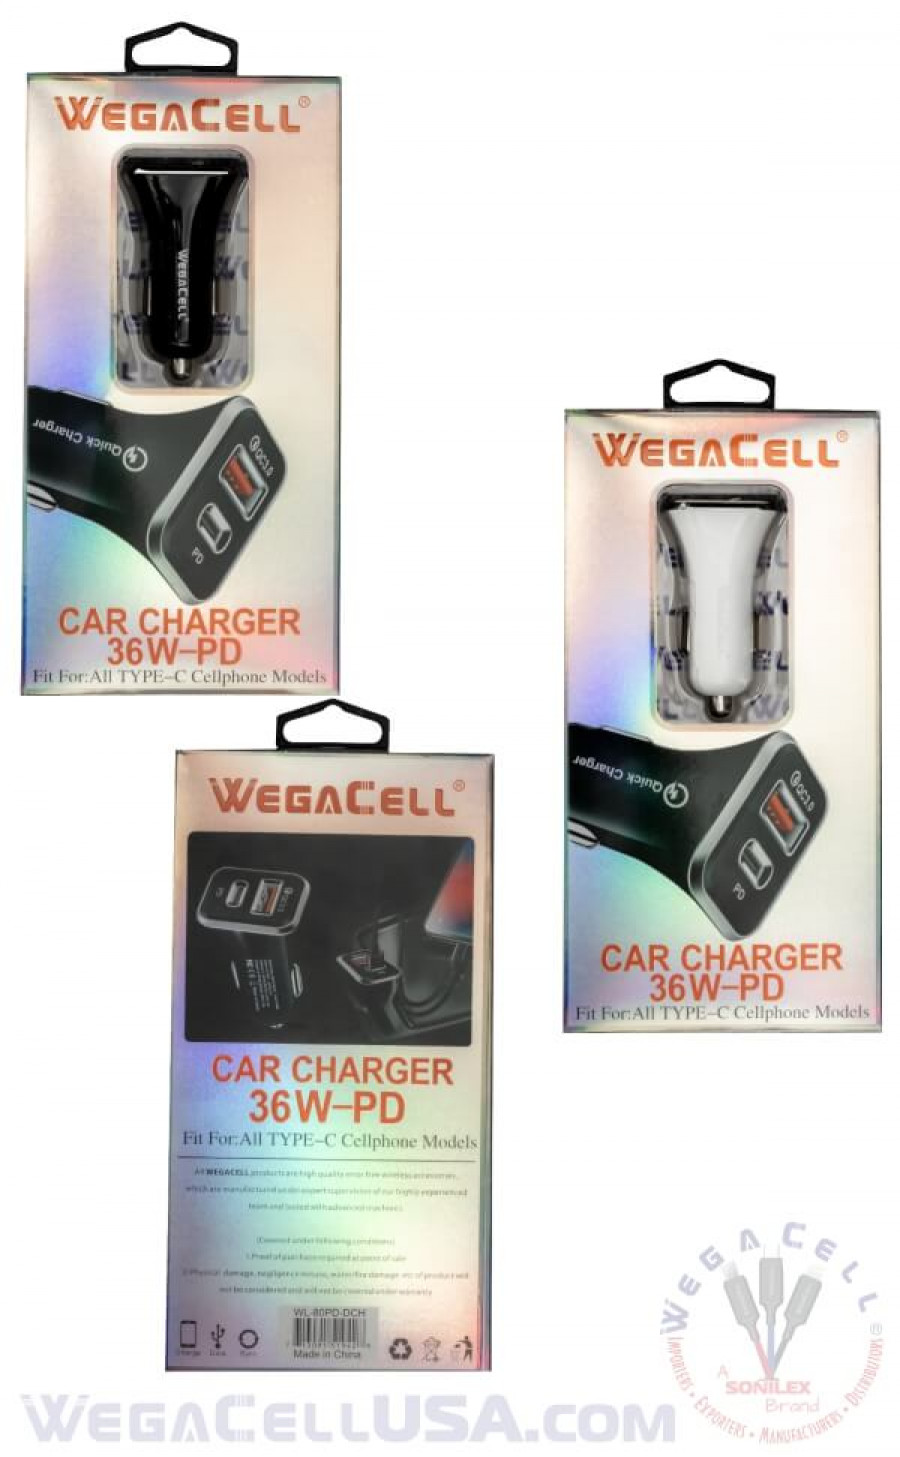 universal dual port fast charging usb - car charger - wholesale pkg wegacell: wl-80pd-dch car charger 26